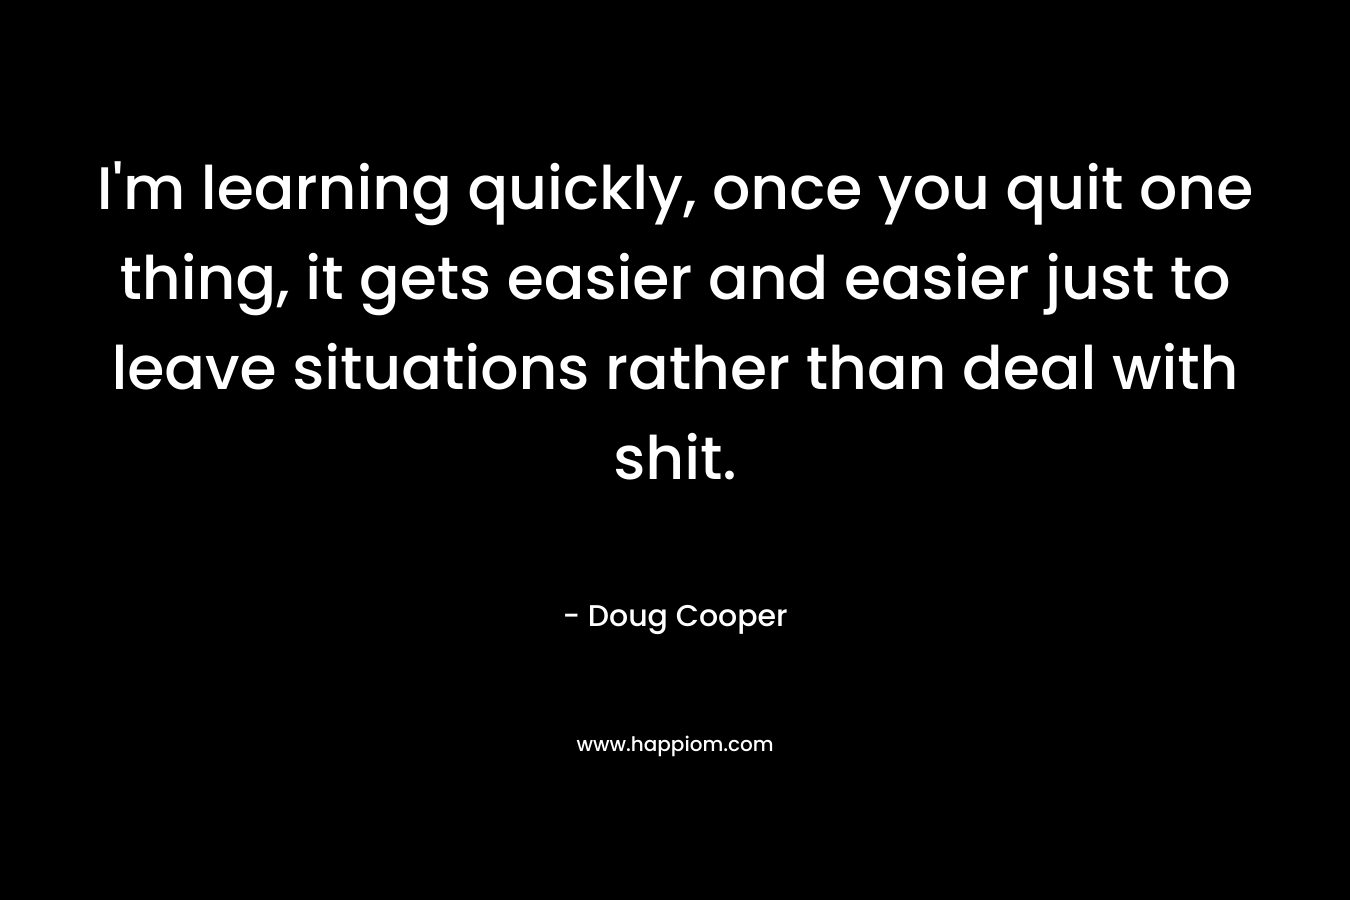 I'm learning quickly, once you quit one thing, it gets easier and easier just to leave situations rather than deal with shit.